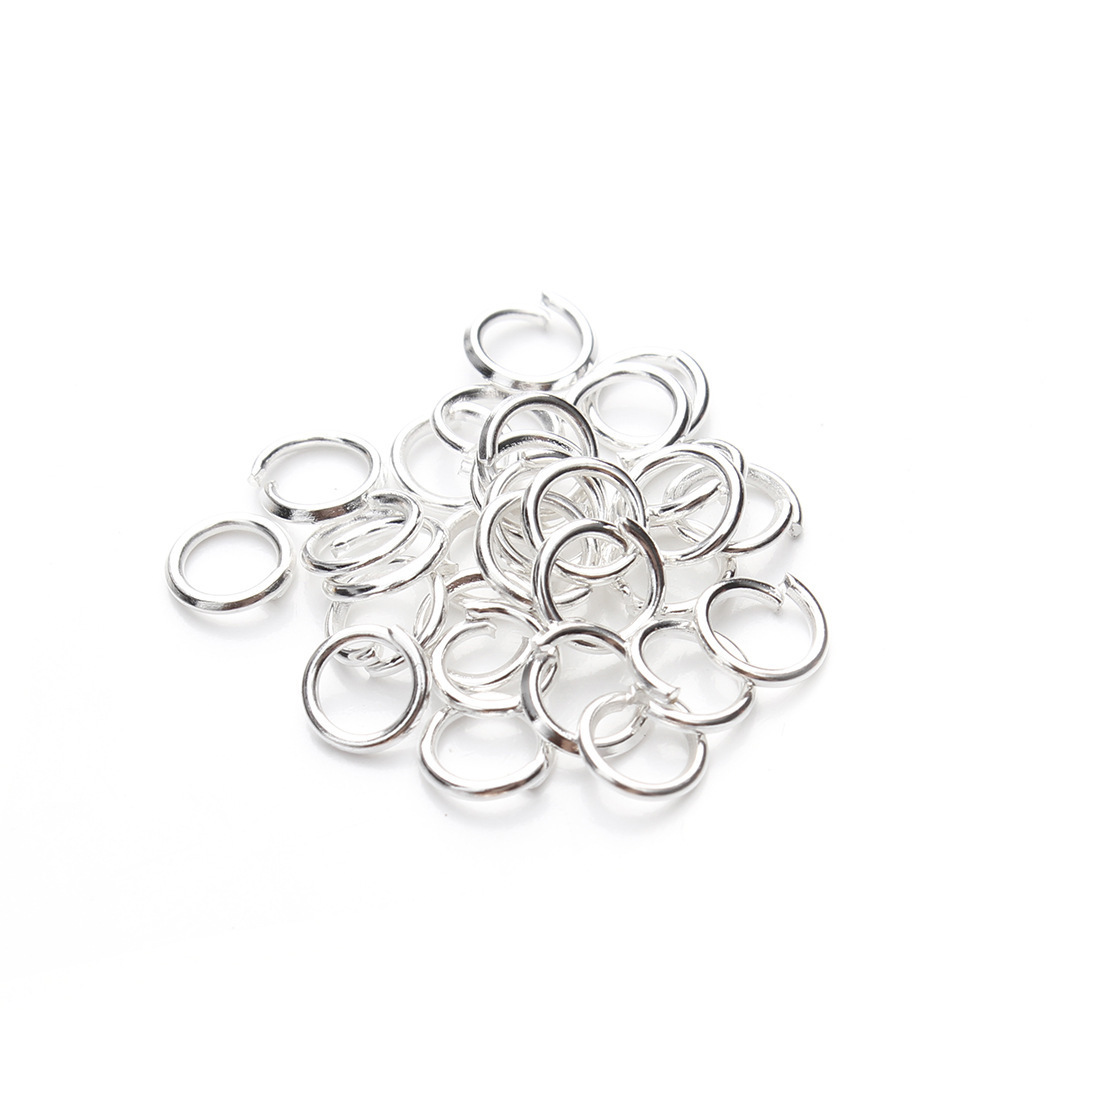 Silver outer diameter 6mm